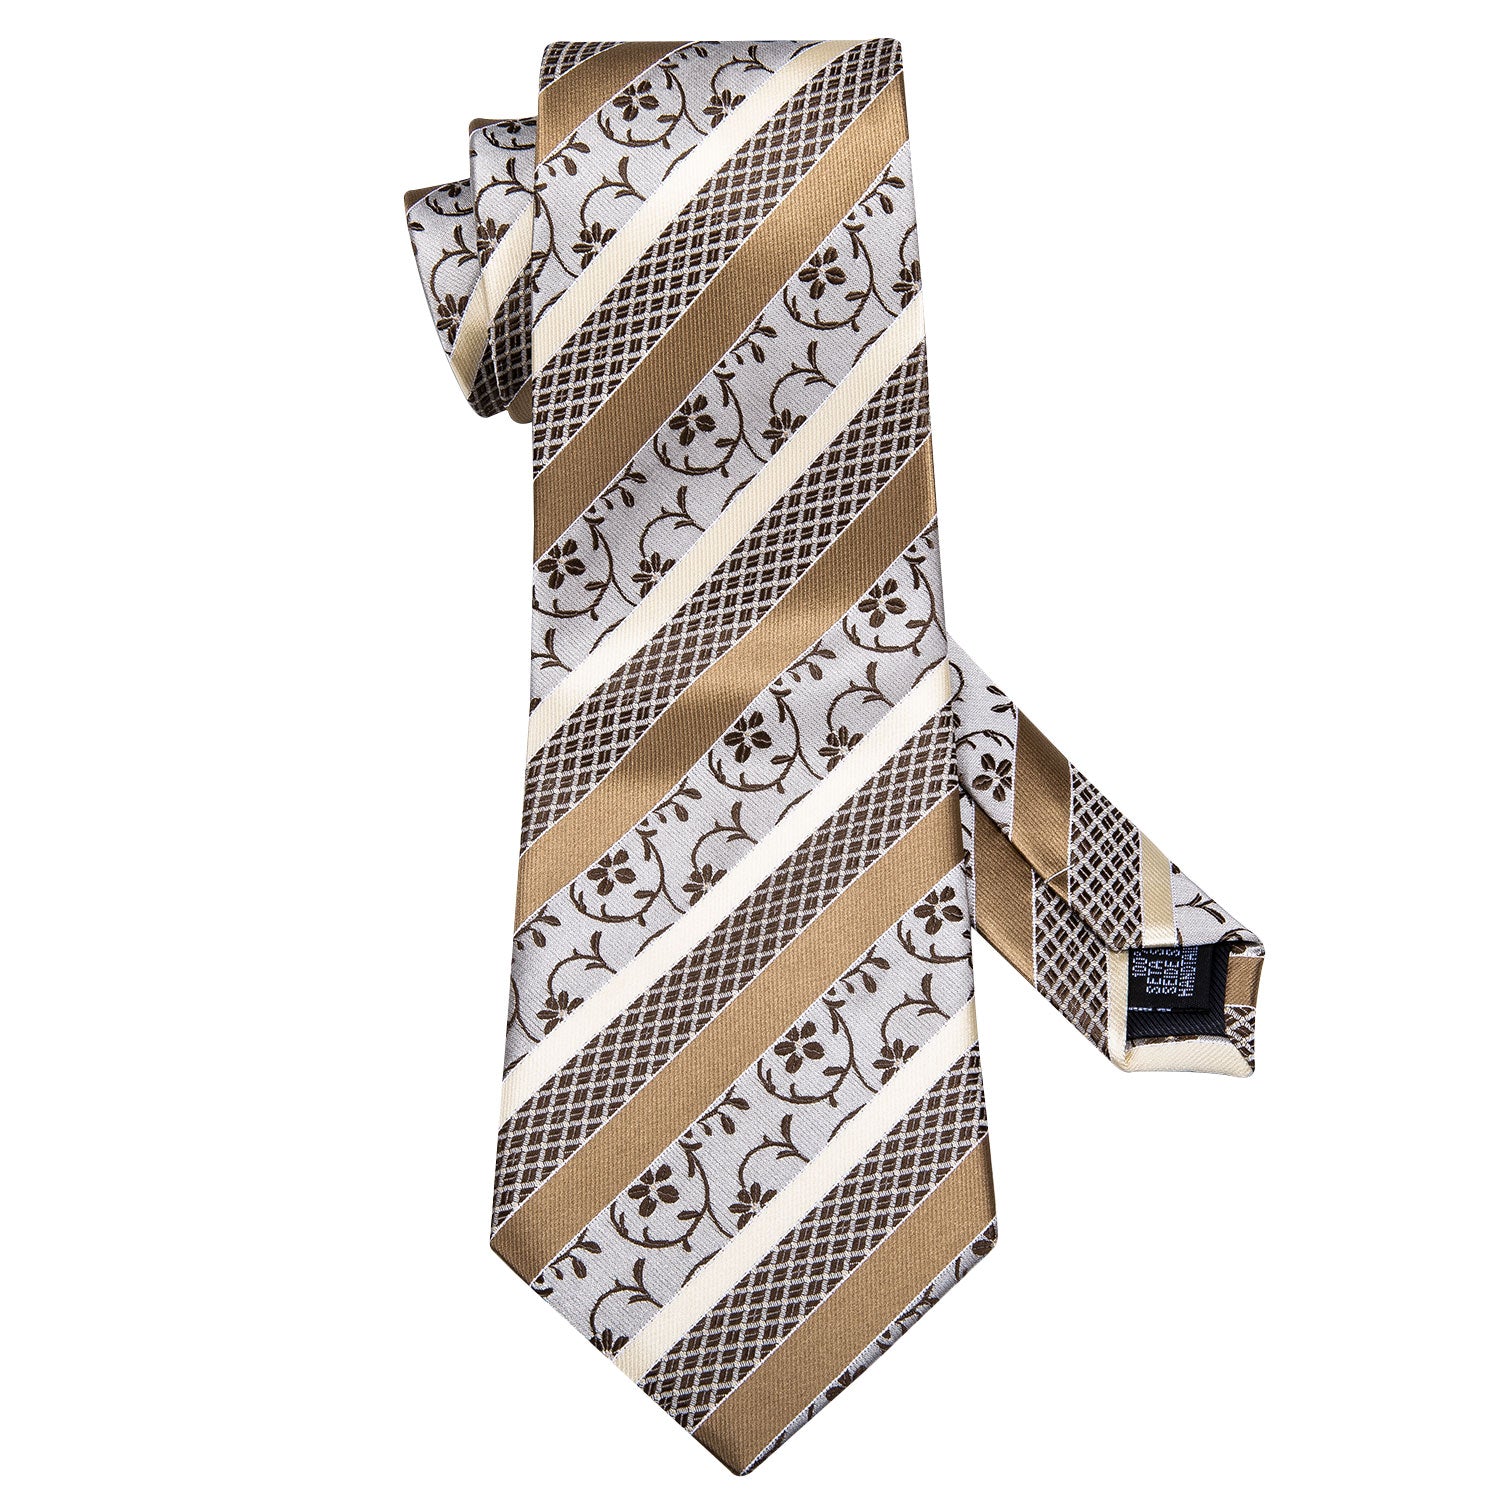 Barry.wang Floral Tie Silk Champagne White Striped Tie Pocket Square Cufflinks Set